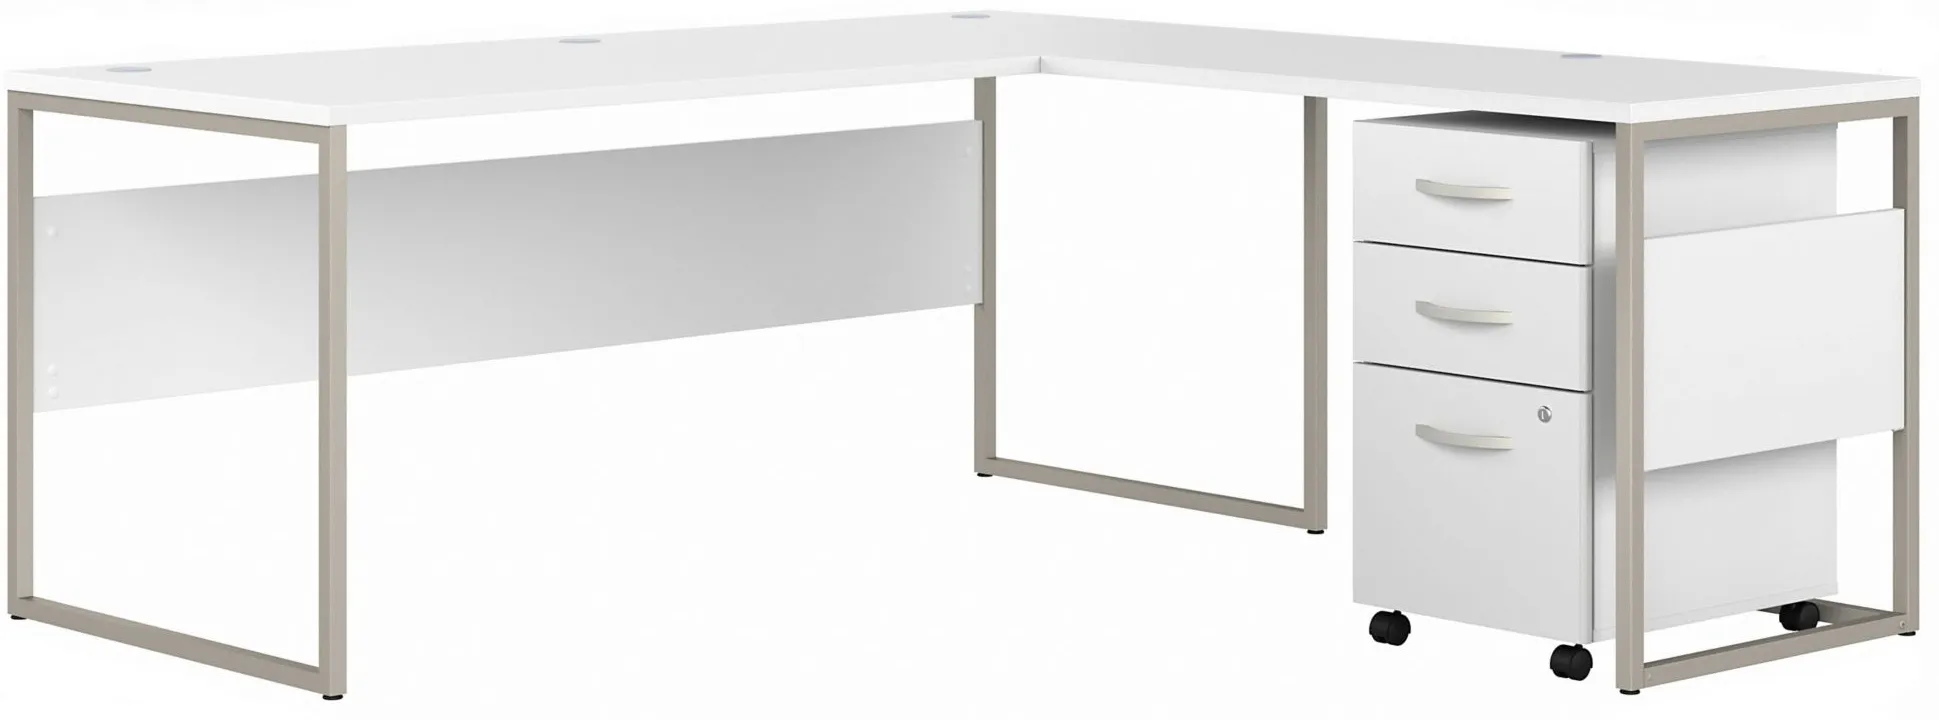 Steinbeck L-Shaped Desk w/ File Cabinet in White by Bush Industries